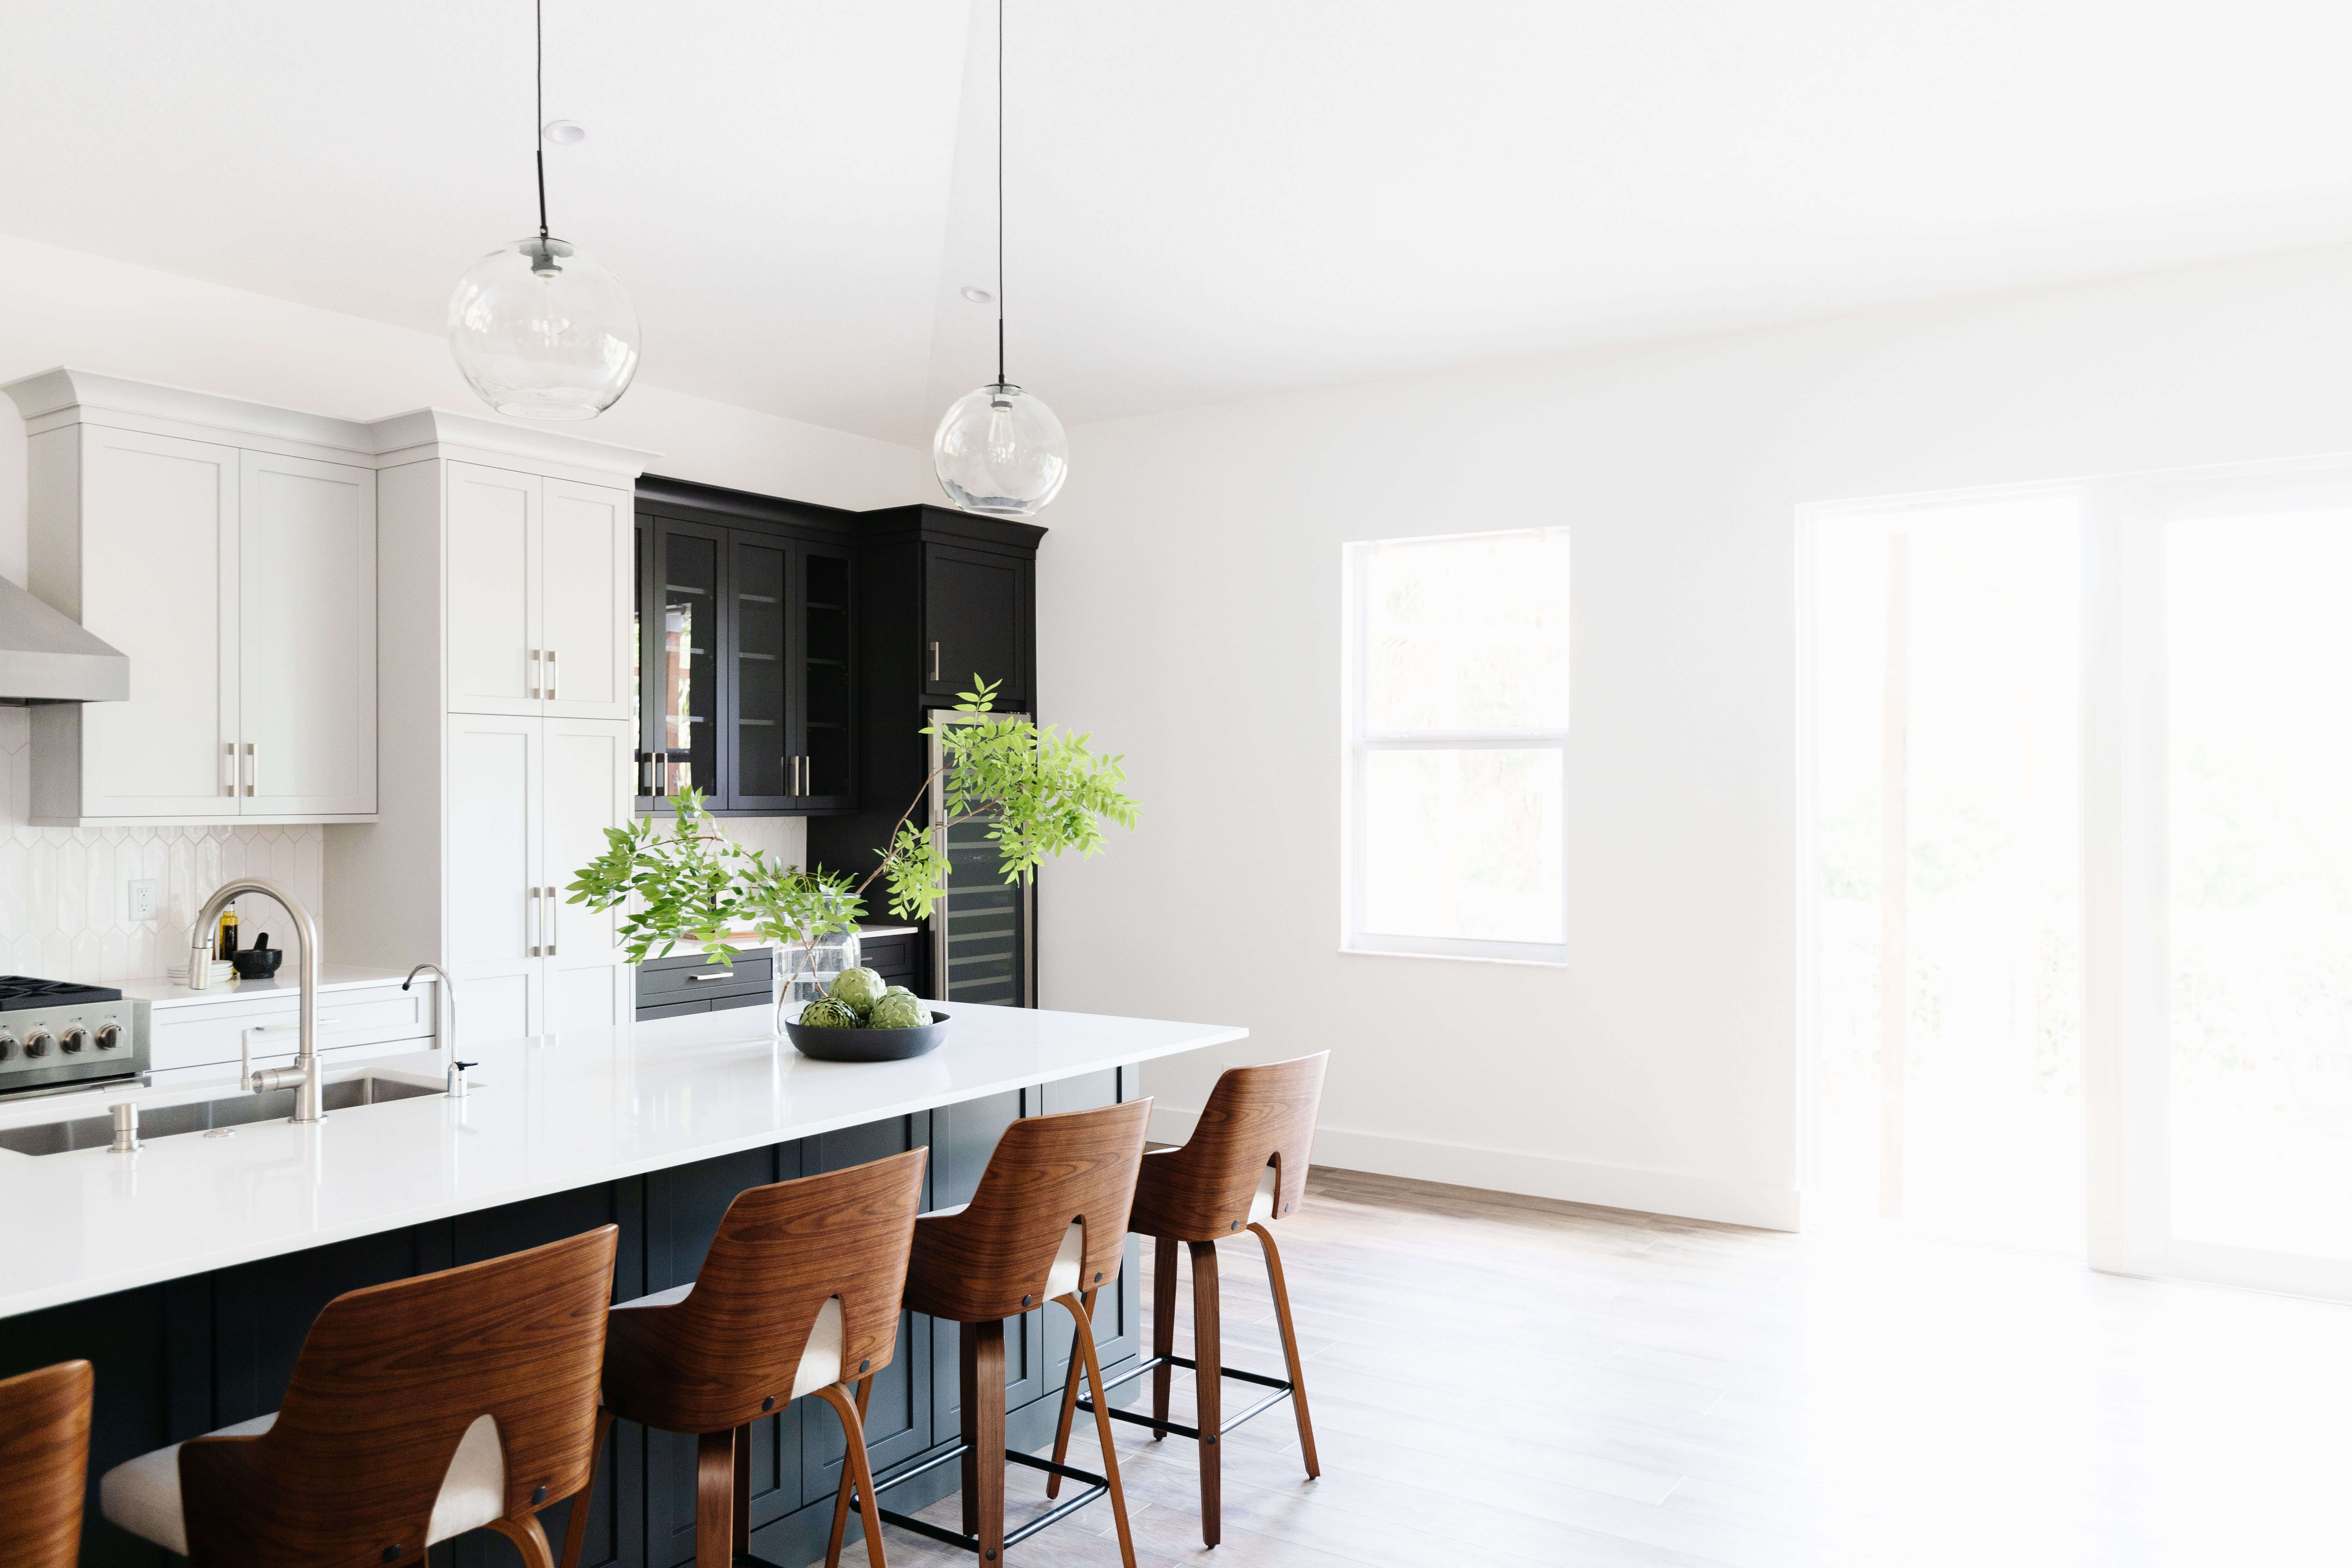 A black painted kitchen island with Mid-Century Modern style bar stools and bright white walls and kitchen cabinets.